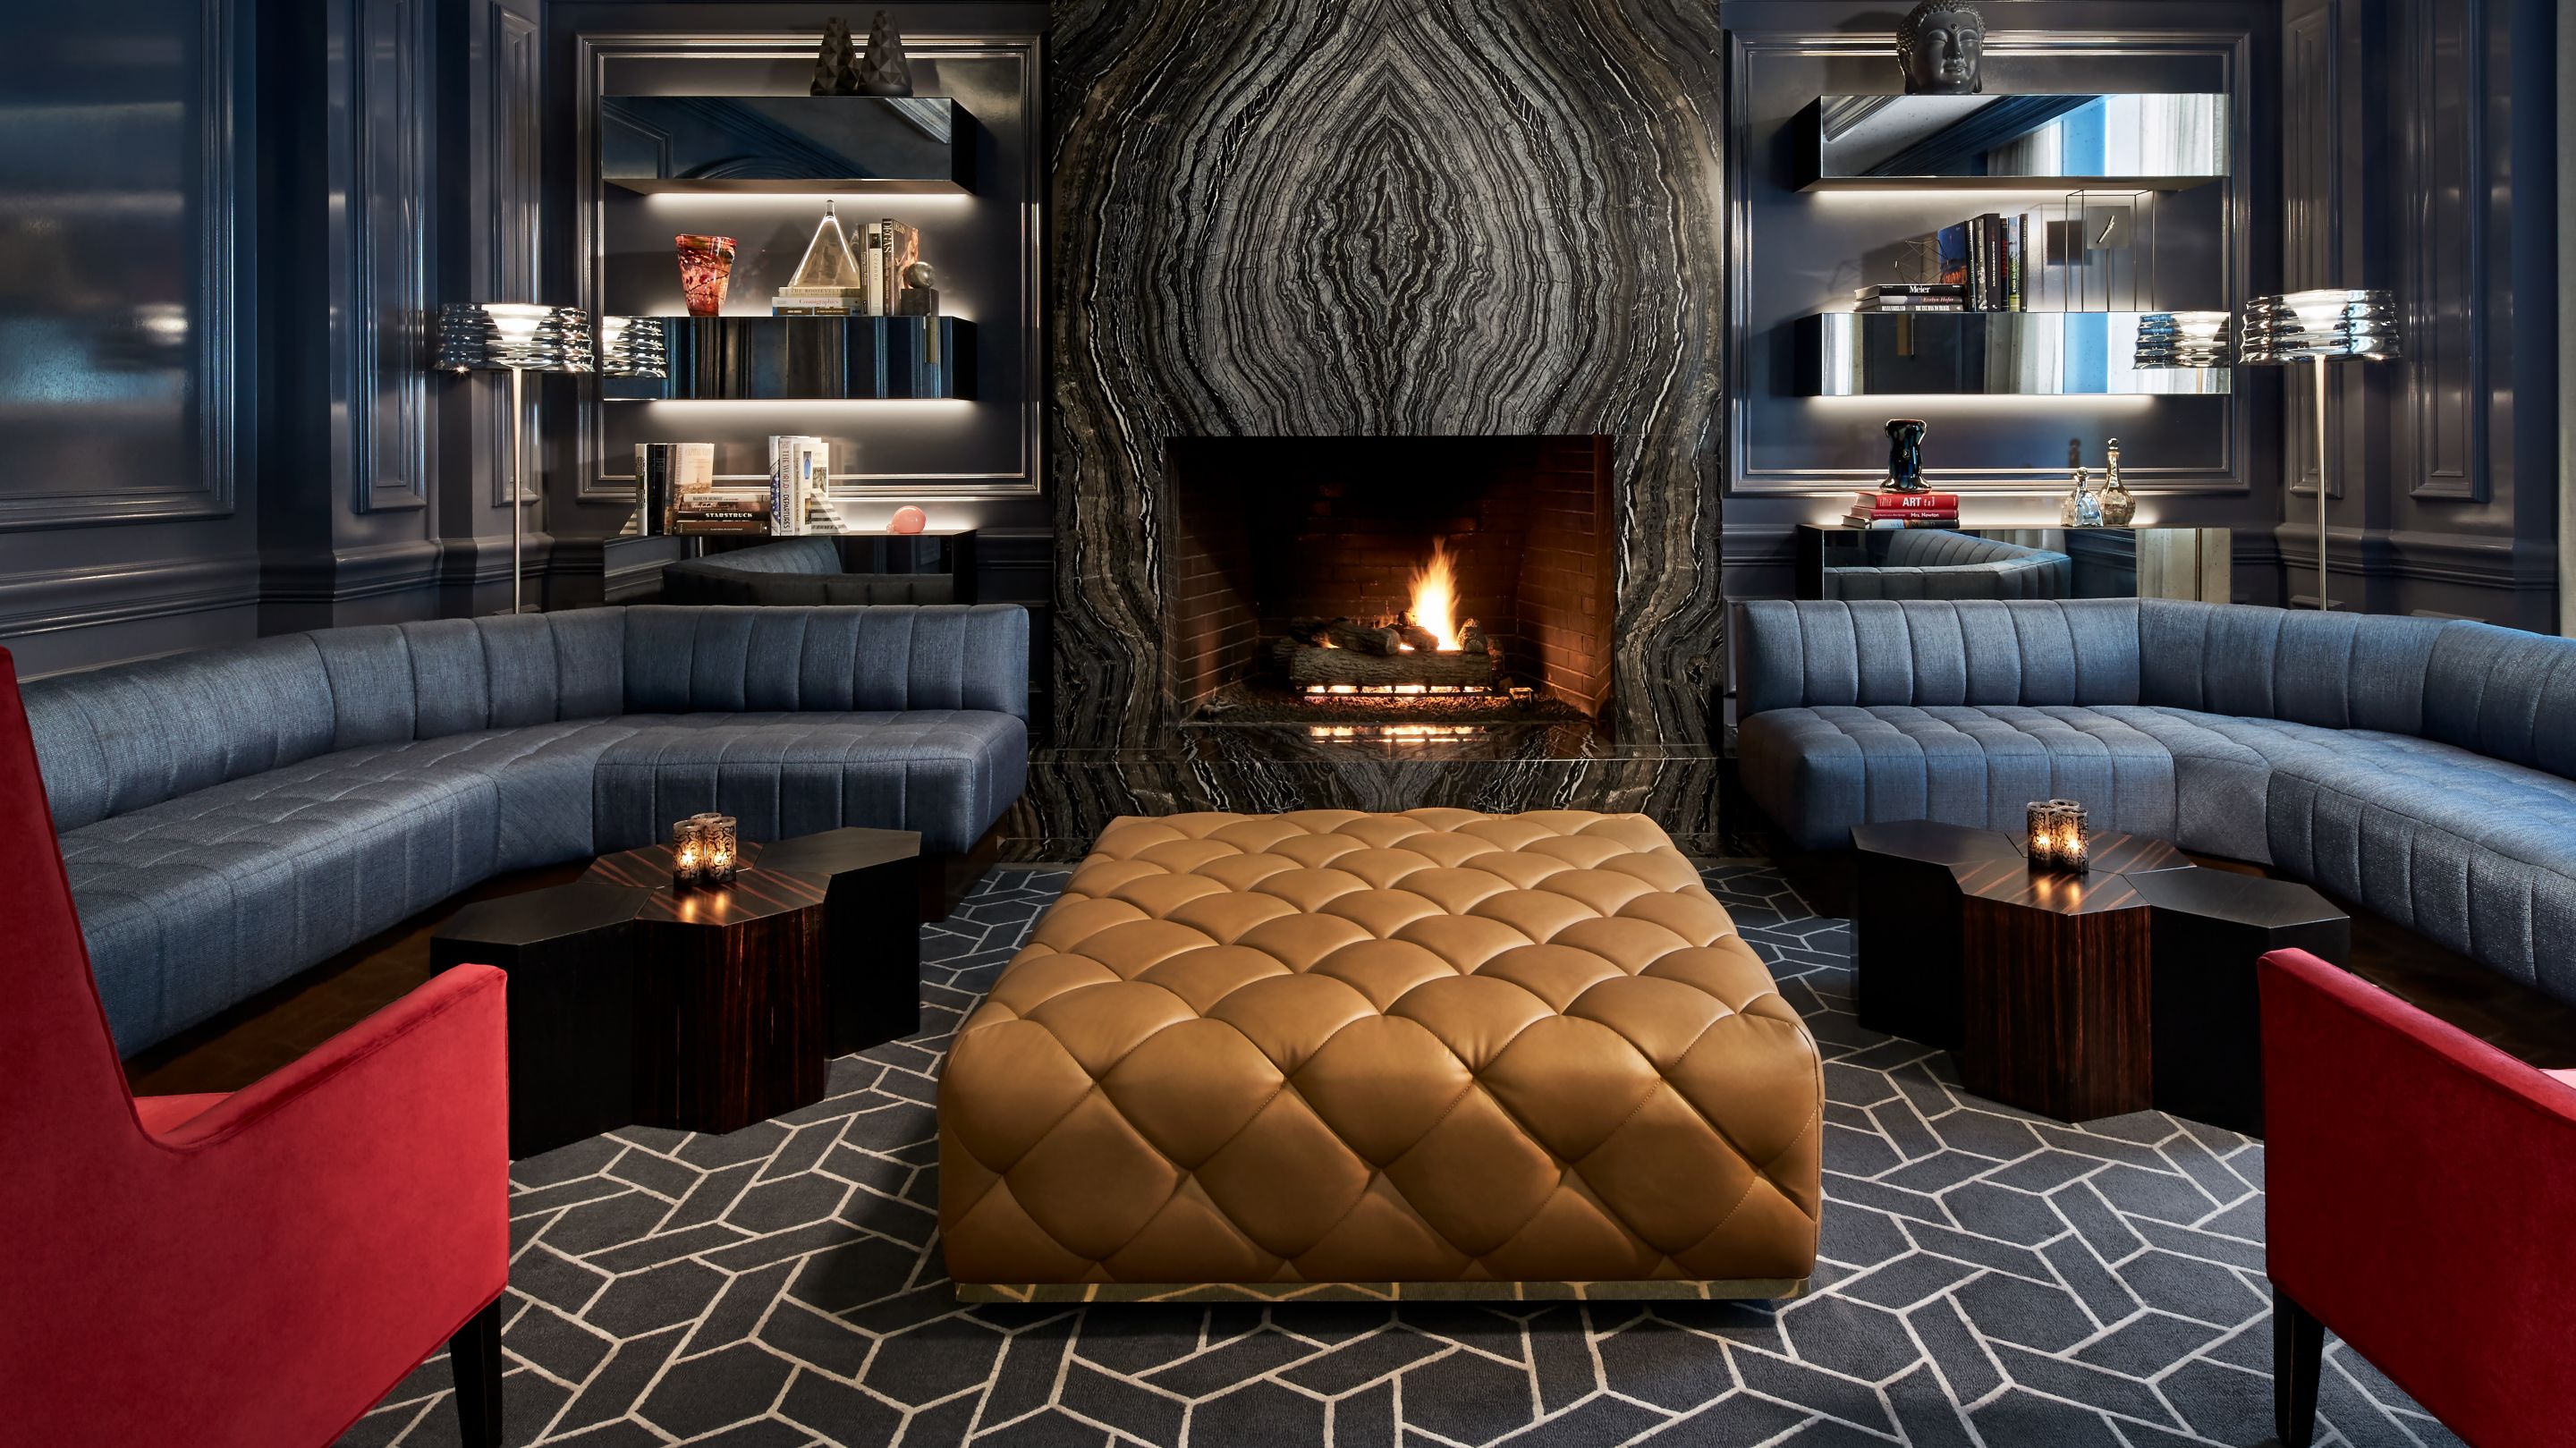 A banquette-lined room with a fireplace, bookshelves and a tufted "table"